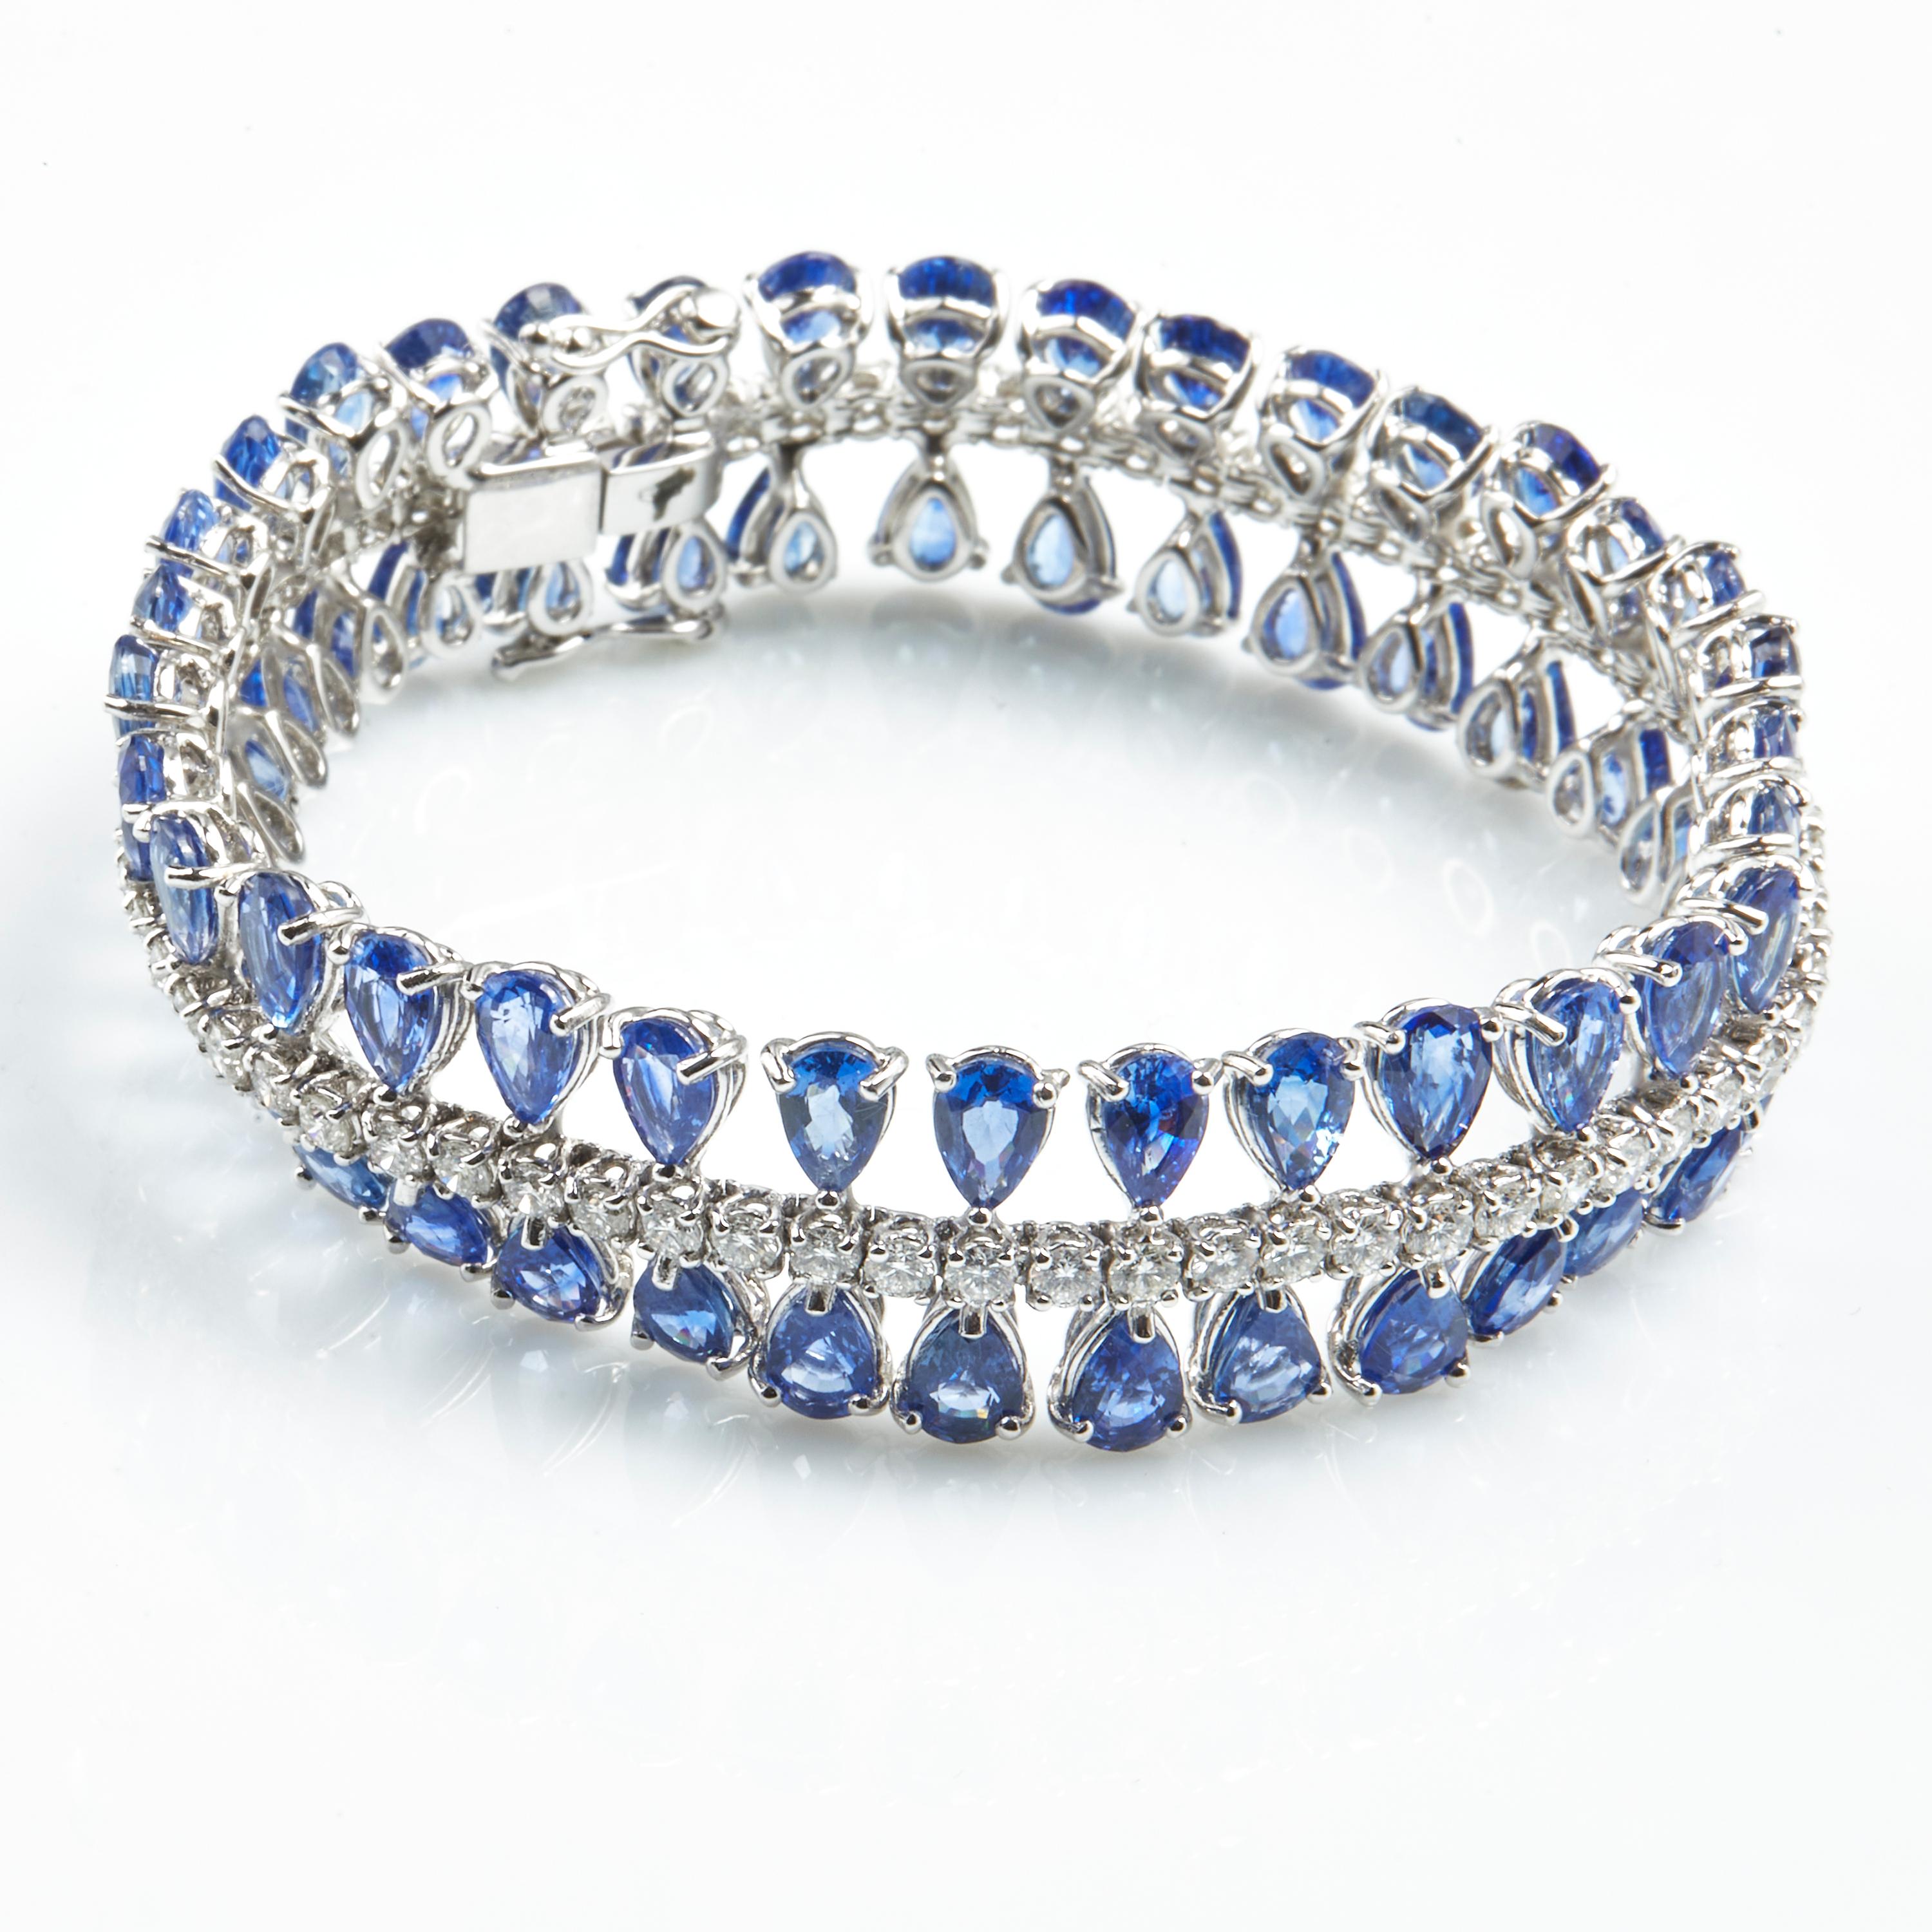 Bracelet White Gold 18 K Gianni Lazzaro

Diamonds 68-03,86 ct HSI 
Blue Sapphire 68- 32,69ct.

With a heritage of ancient fine Swiss jewelry traditions, NATKINA is a Geneva-based jewelry brand that creates modern jewelry masterpieces suitable for